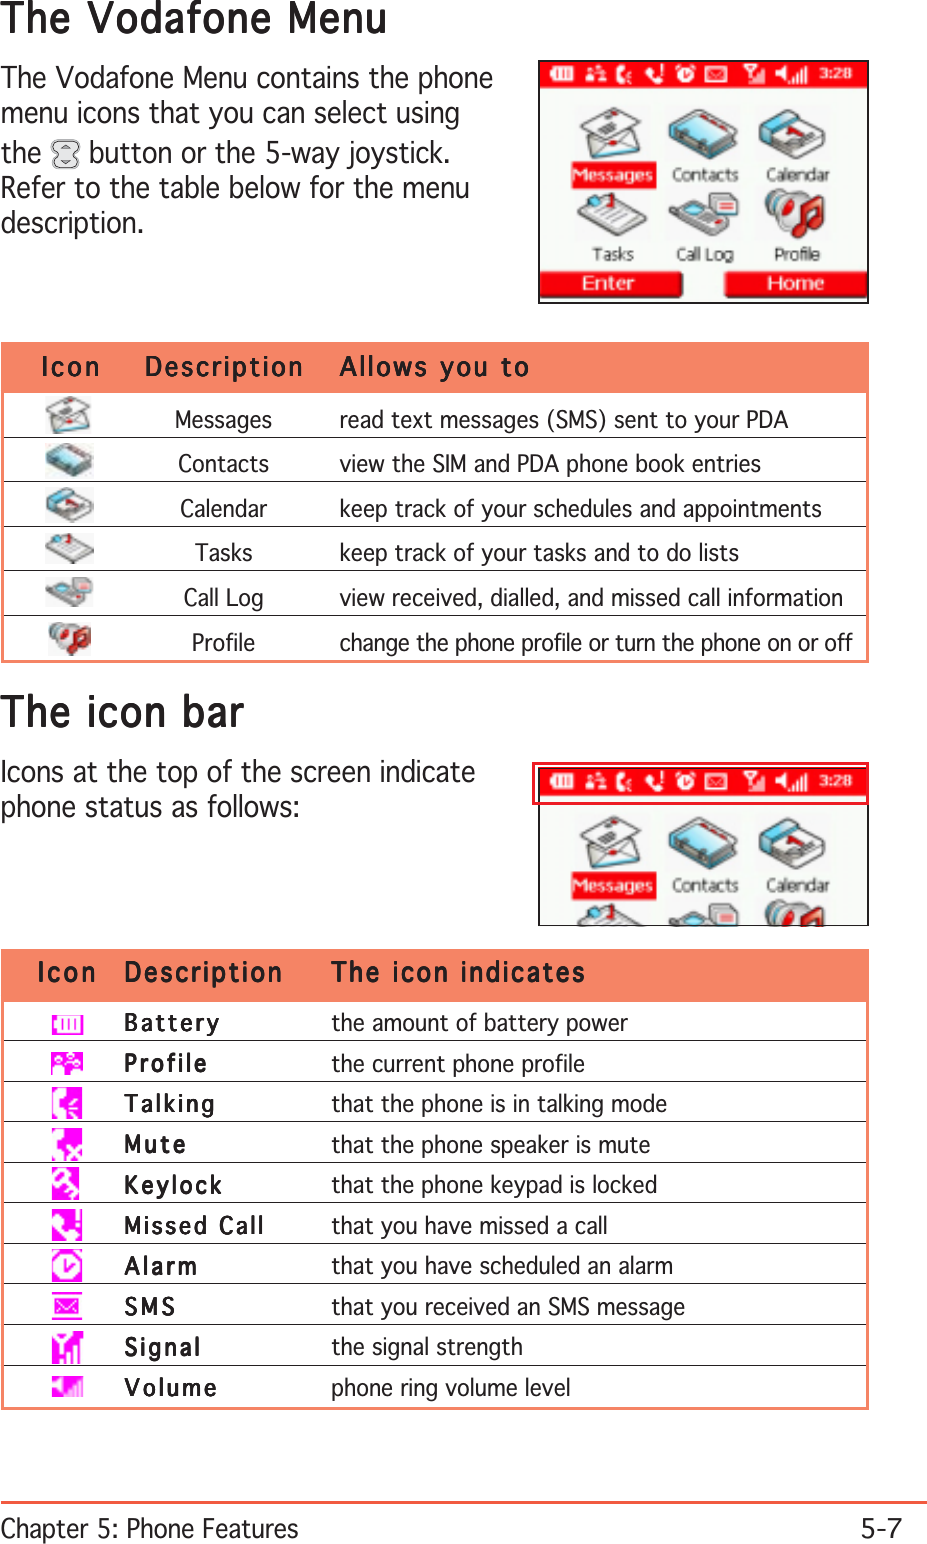 Chapter 5: Phone Features5-7The Vodafone MenuThe Vodafone MenuThe Vodafone MenuThe Vodafone MenuThe Vodafone MenuThe Vodafone Menu contains the phonemenu icons that you can select usingthe  button or the 5-way joystick.Refer to the table below for the menudescription.The icon barThe icon barThe icon barThe icon barThe icon barIcons at the top of the screen indicatephone status as follows:IconIconIconIconIcon DescriptionDescriptionDescriptionDescriptionDescription The icon indicatesThe icon indicatesThe icon indicatesThe icon indicatesThe icon indicatesBatteryBatteryBatteryBatteryB a t t e r y the amount of battery powerProfileProfileProfileProfileP r o f i l e the current phone profileTalkingTalkingTalkingTalkingT a l k i n g that the phone is in talking modeMuteMuteMuteMuteM u t e that the phone speaker is muteKeylockKeylockKeylockKeylockK e y l o c k that the phone keypad is lockedMissed CallMissed CallMissed CallMissed CallM i s s e d   C a l l that you have missed a callAlarmAlarmAlarmAlarmA l a r m that you have scheduled an alarmSMSSMSSMSSMSS M S that you received an SMS messageSignalSignalSignalSignalS i g n a l the signal strengthVolumeVolumeVolumeVolumeV o l u m e phone ring volume levelIconIconIconIconIcon DescriptionDescriptionDescriptionDescriptionDescription Allows you toAllows you toAllows you toAllows you toAllows you toMessages read text messages (SMS) sent to your PDAContacts view the SIM and PDA phone book entriesCalendar keep track of your schedules and appointmentsTasks keep track of your tasks and to do listsCall Log view received, dialled, and missed call informationProfile change the phone profile or turn the phone on or off